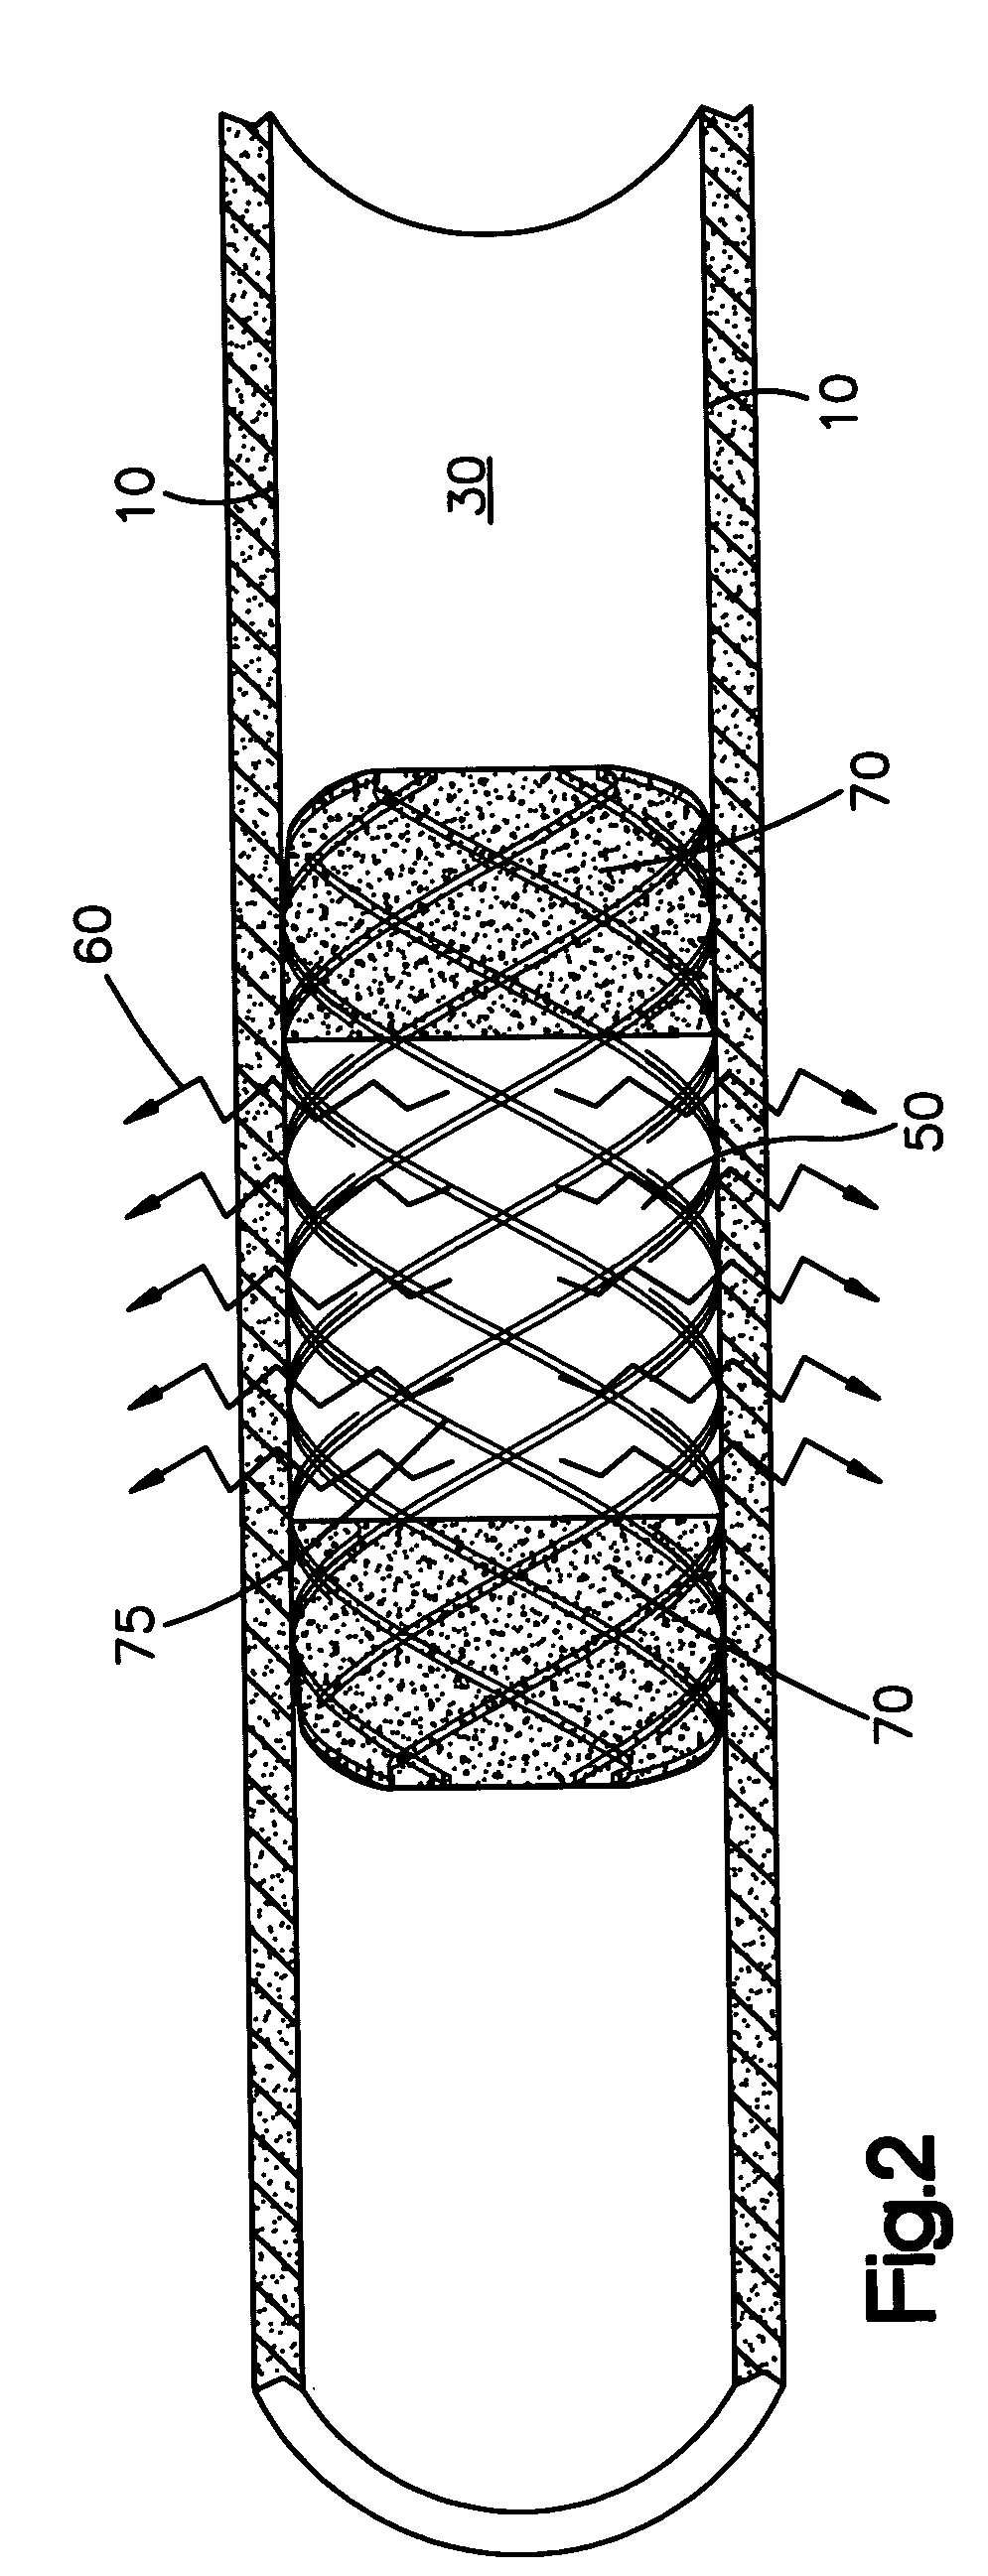 System for administering a combination of therapies to a body lumen